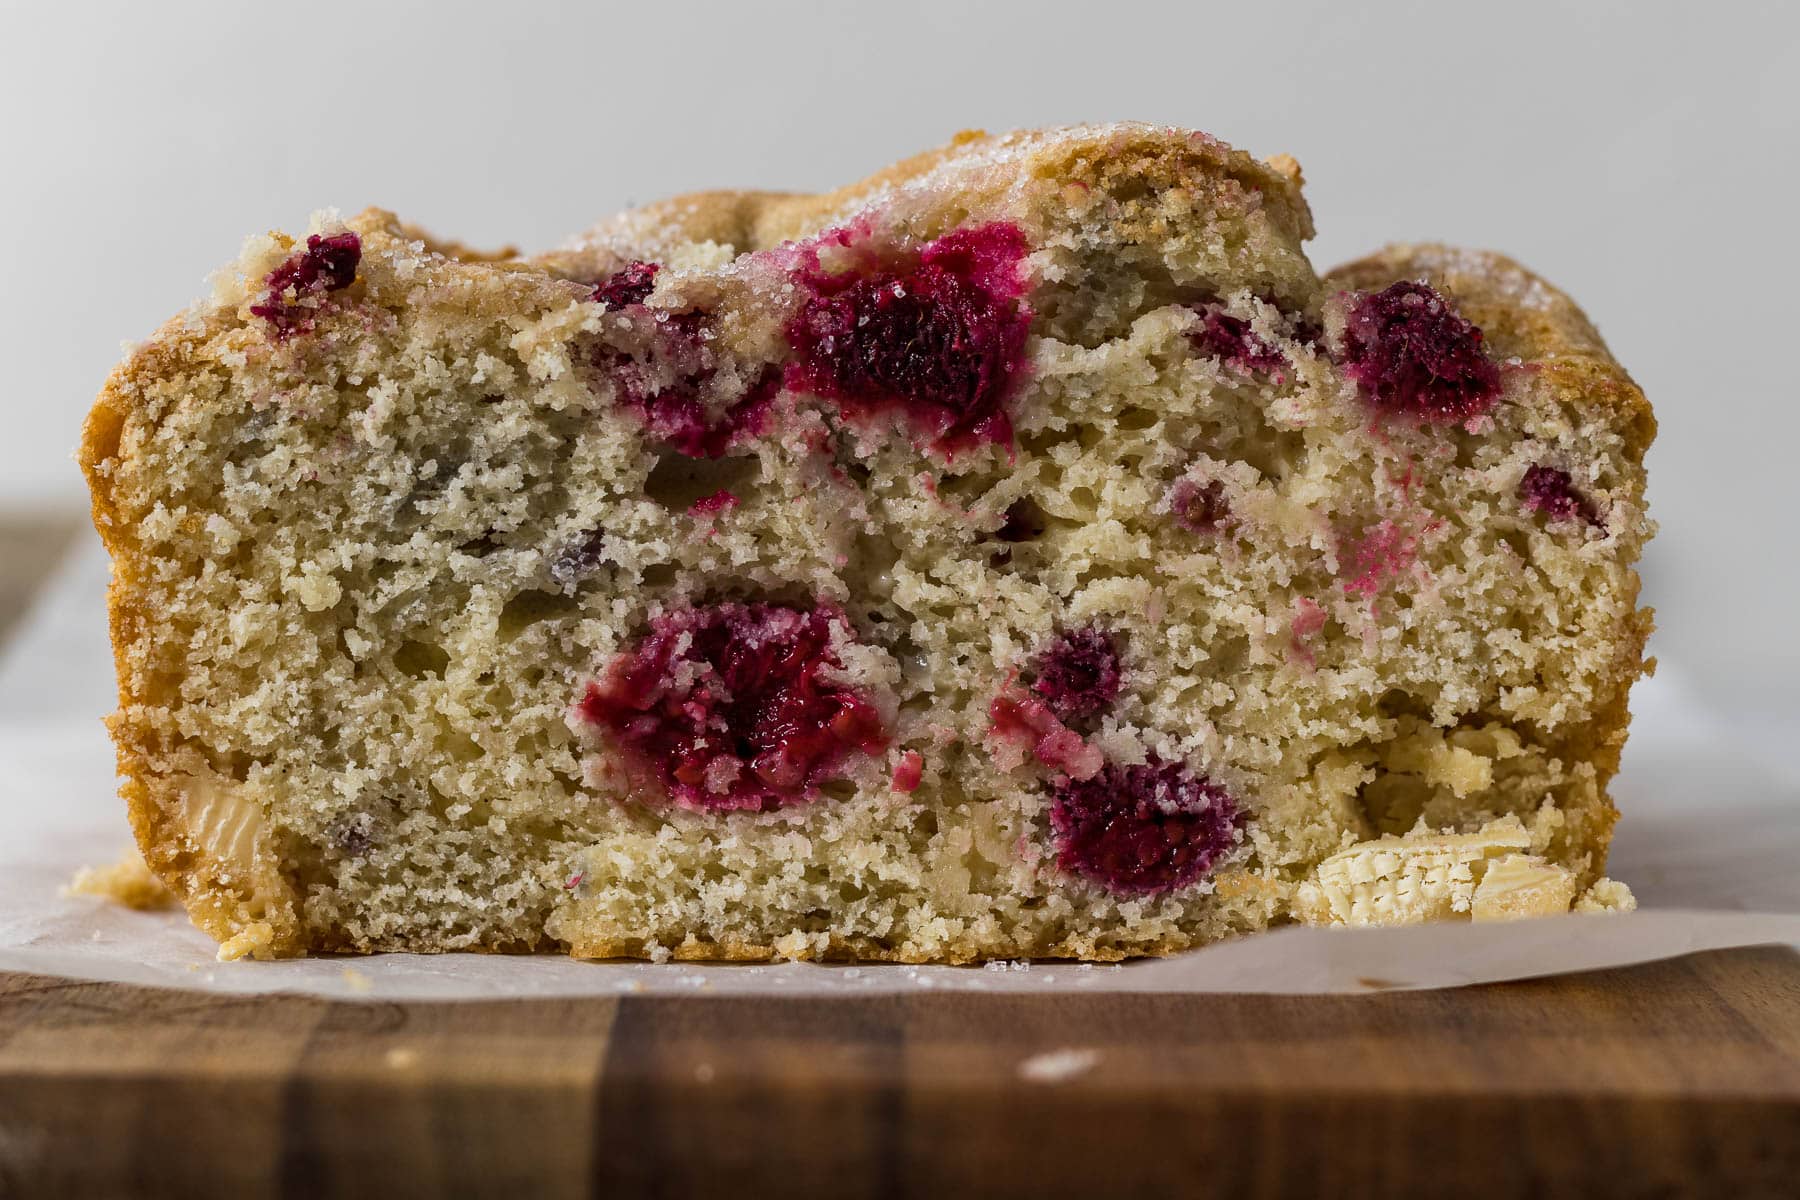 Slice of raspberry and white chocolate loaf cake.